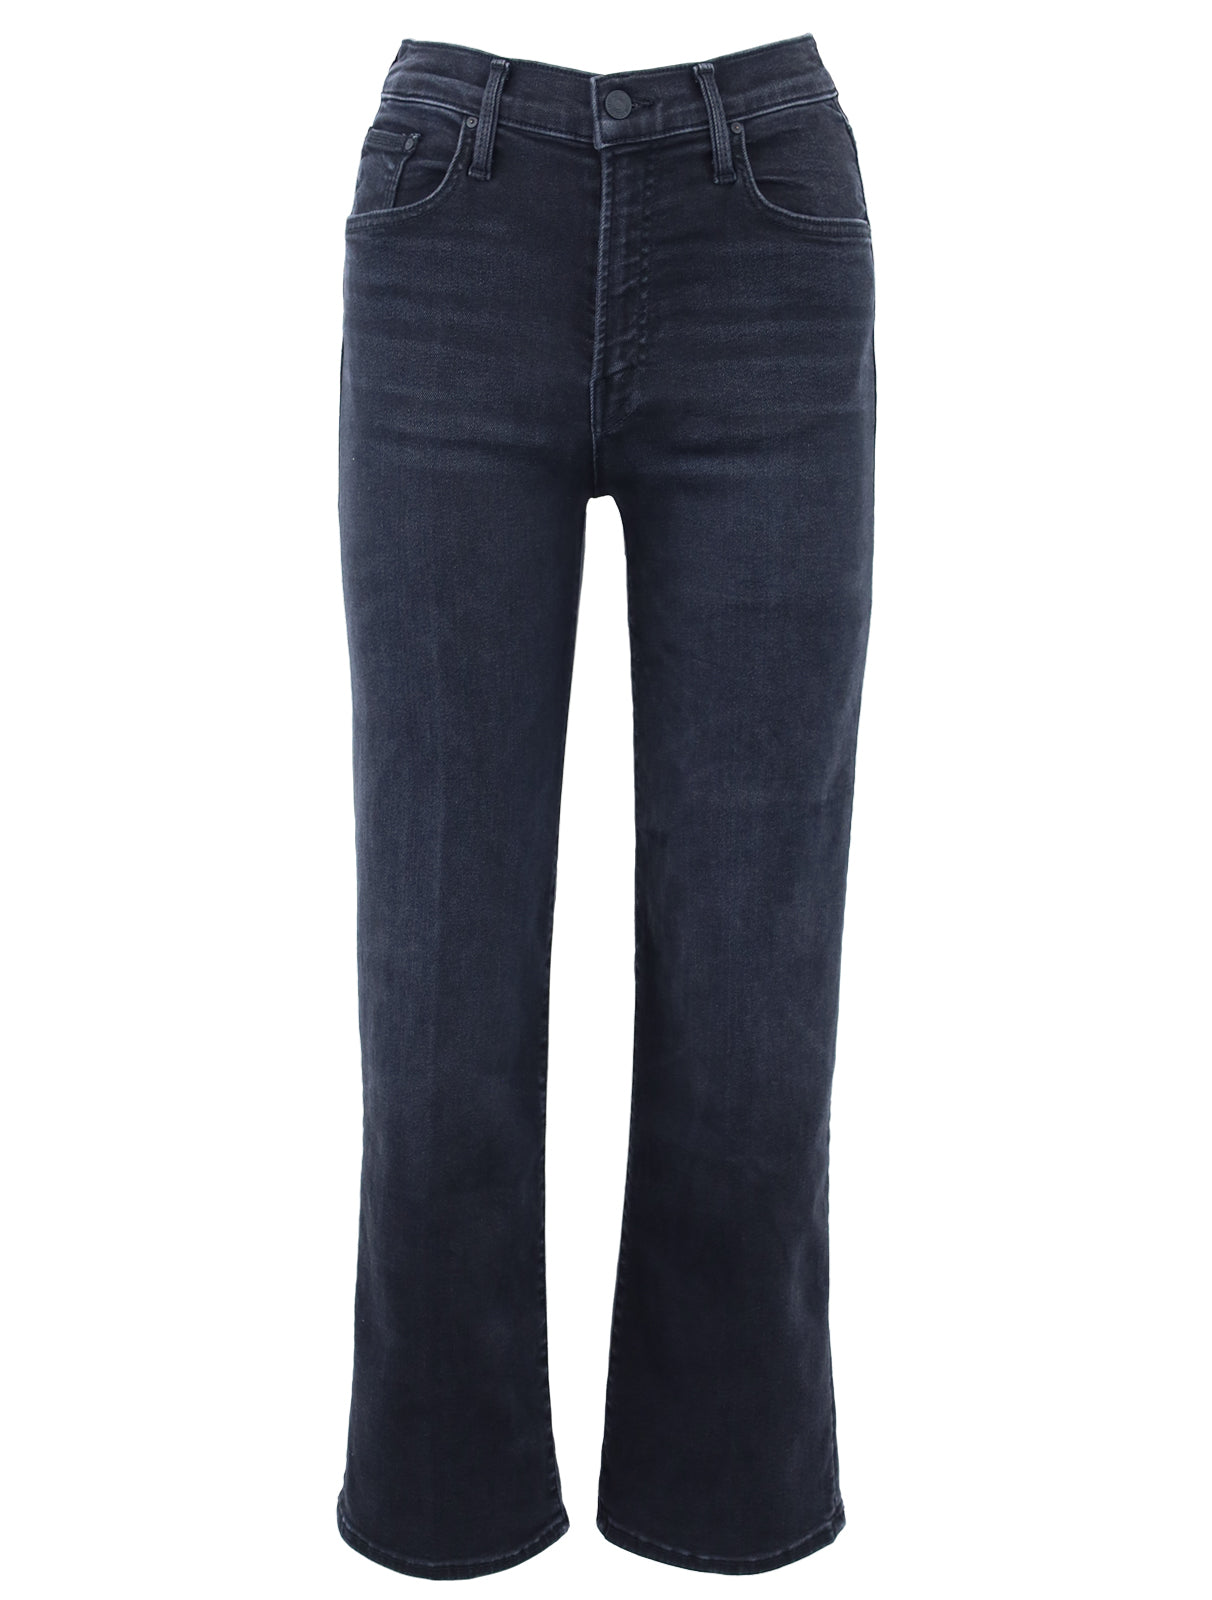 MOTHER DENIM THE RAMBLER JEANS IN A DARK GREY AND BLACK WASH